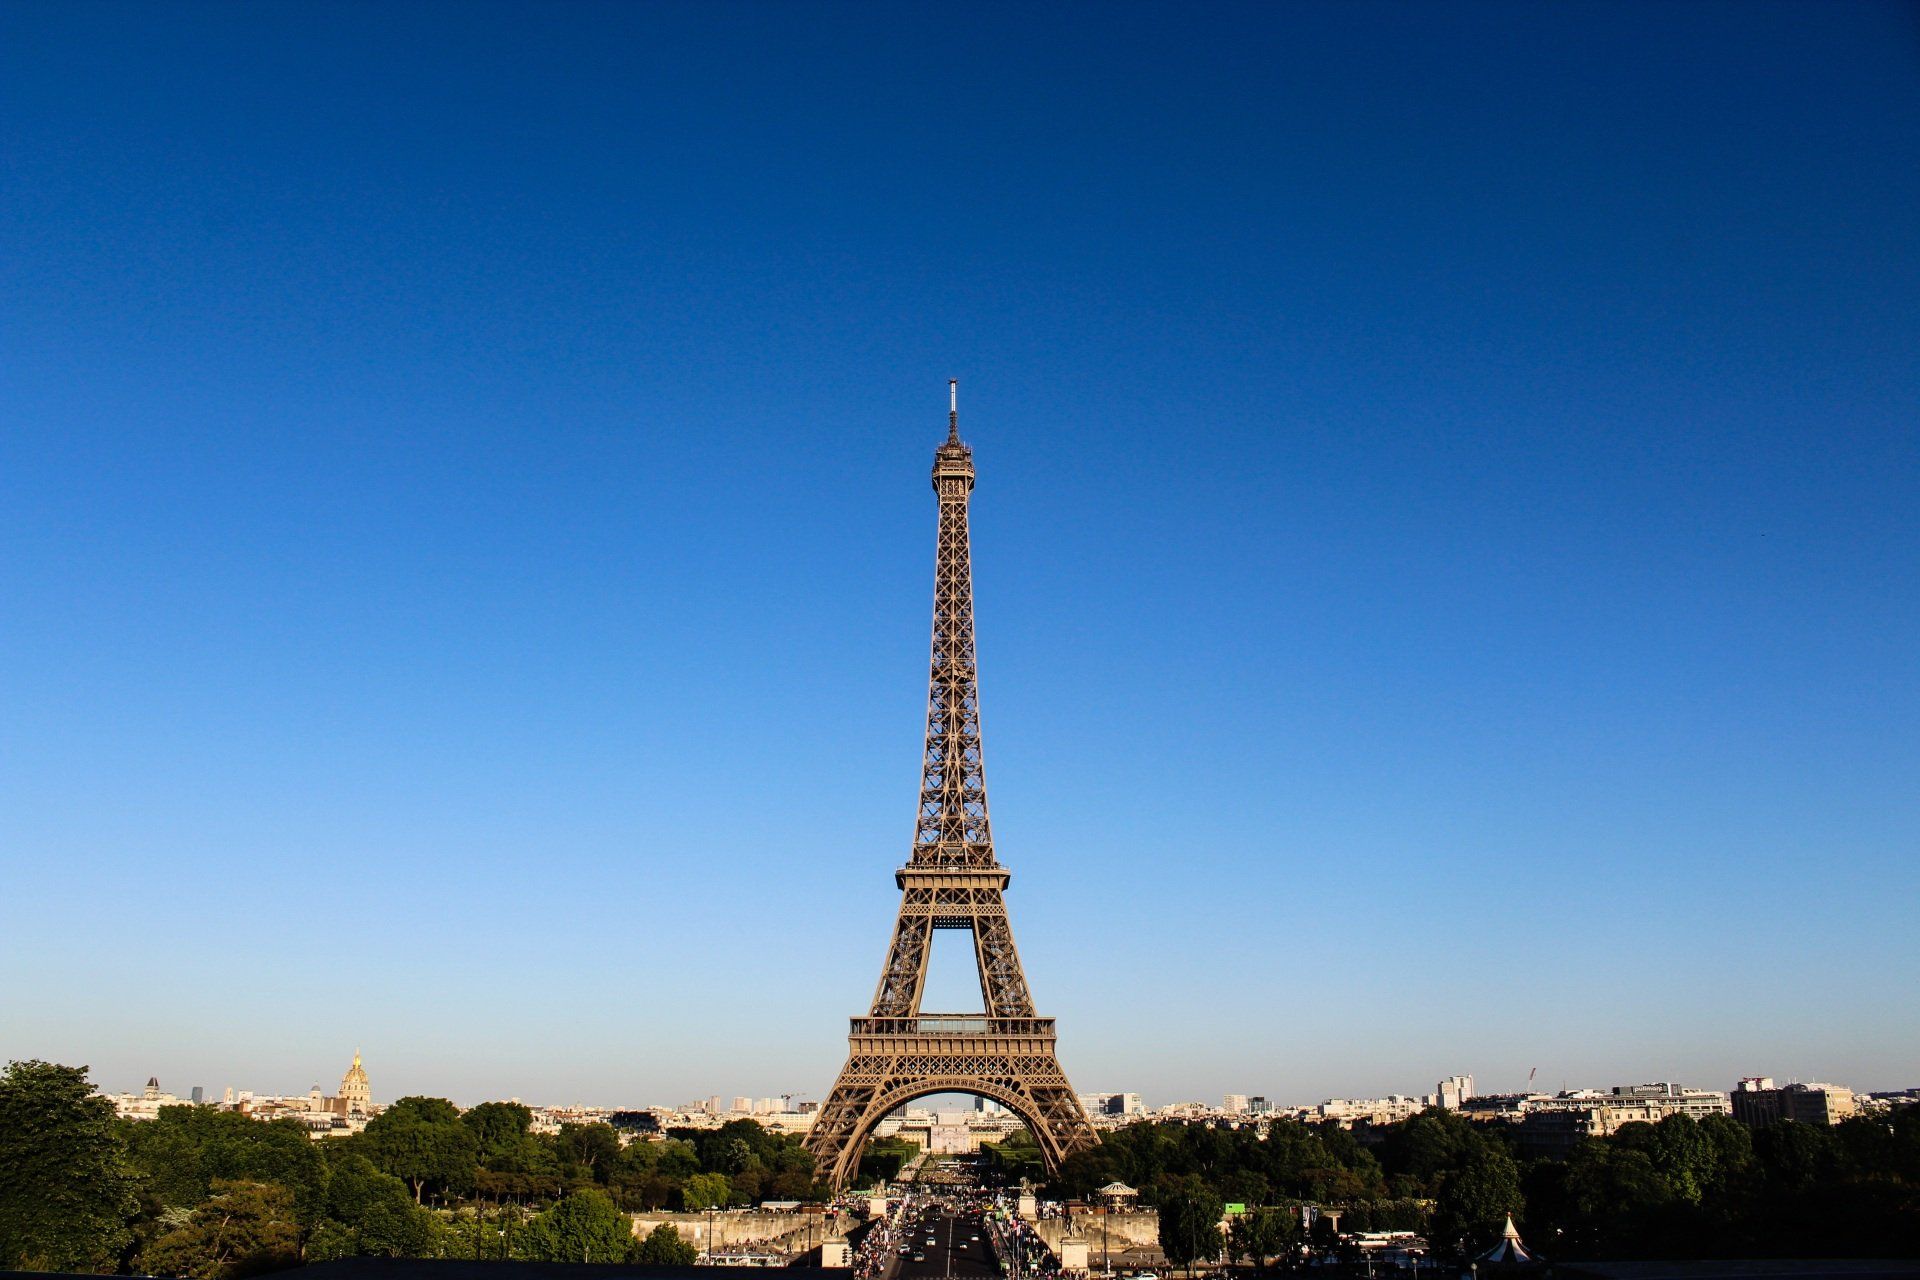 The eiffel tower is against a blue sky in paris